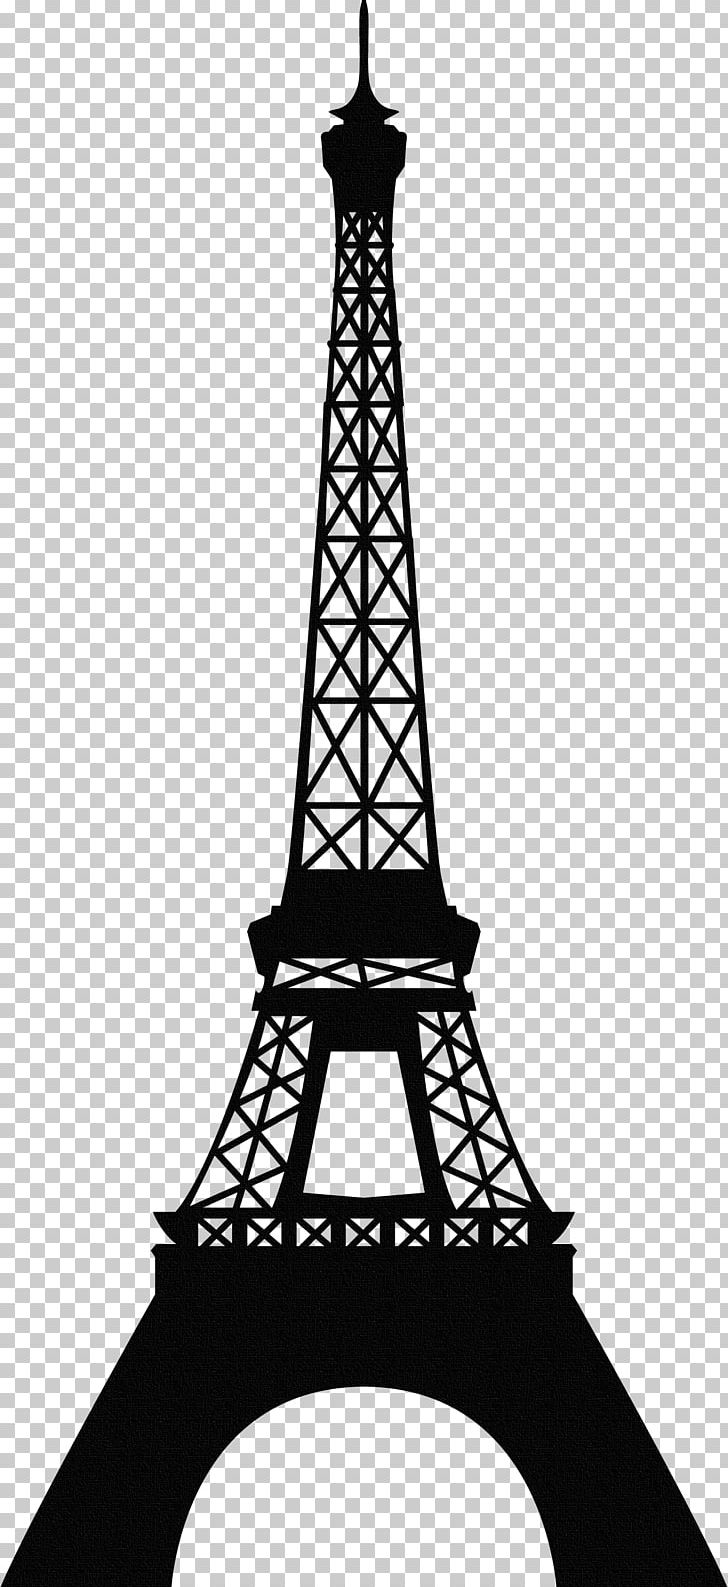 Eiffel Tower Wall Decal PNG, Clipart, Black And White, Clip Art, Decal, Eiffel Tower, Landmark Free PNG Download